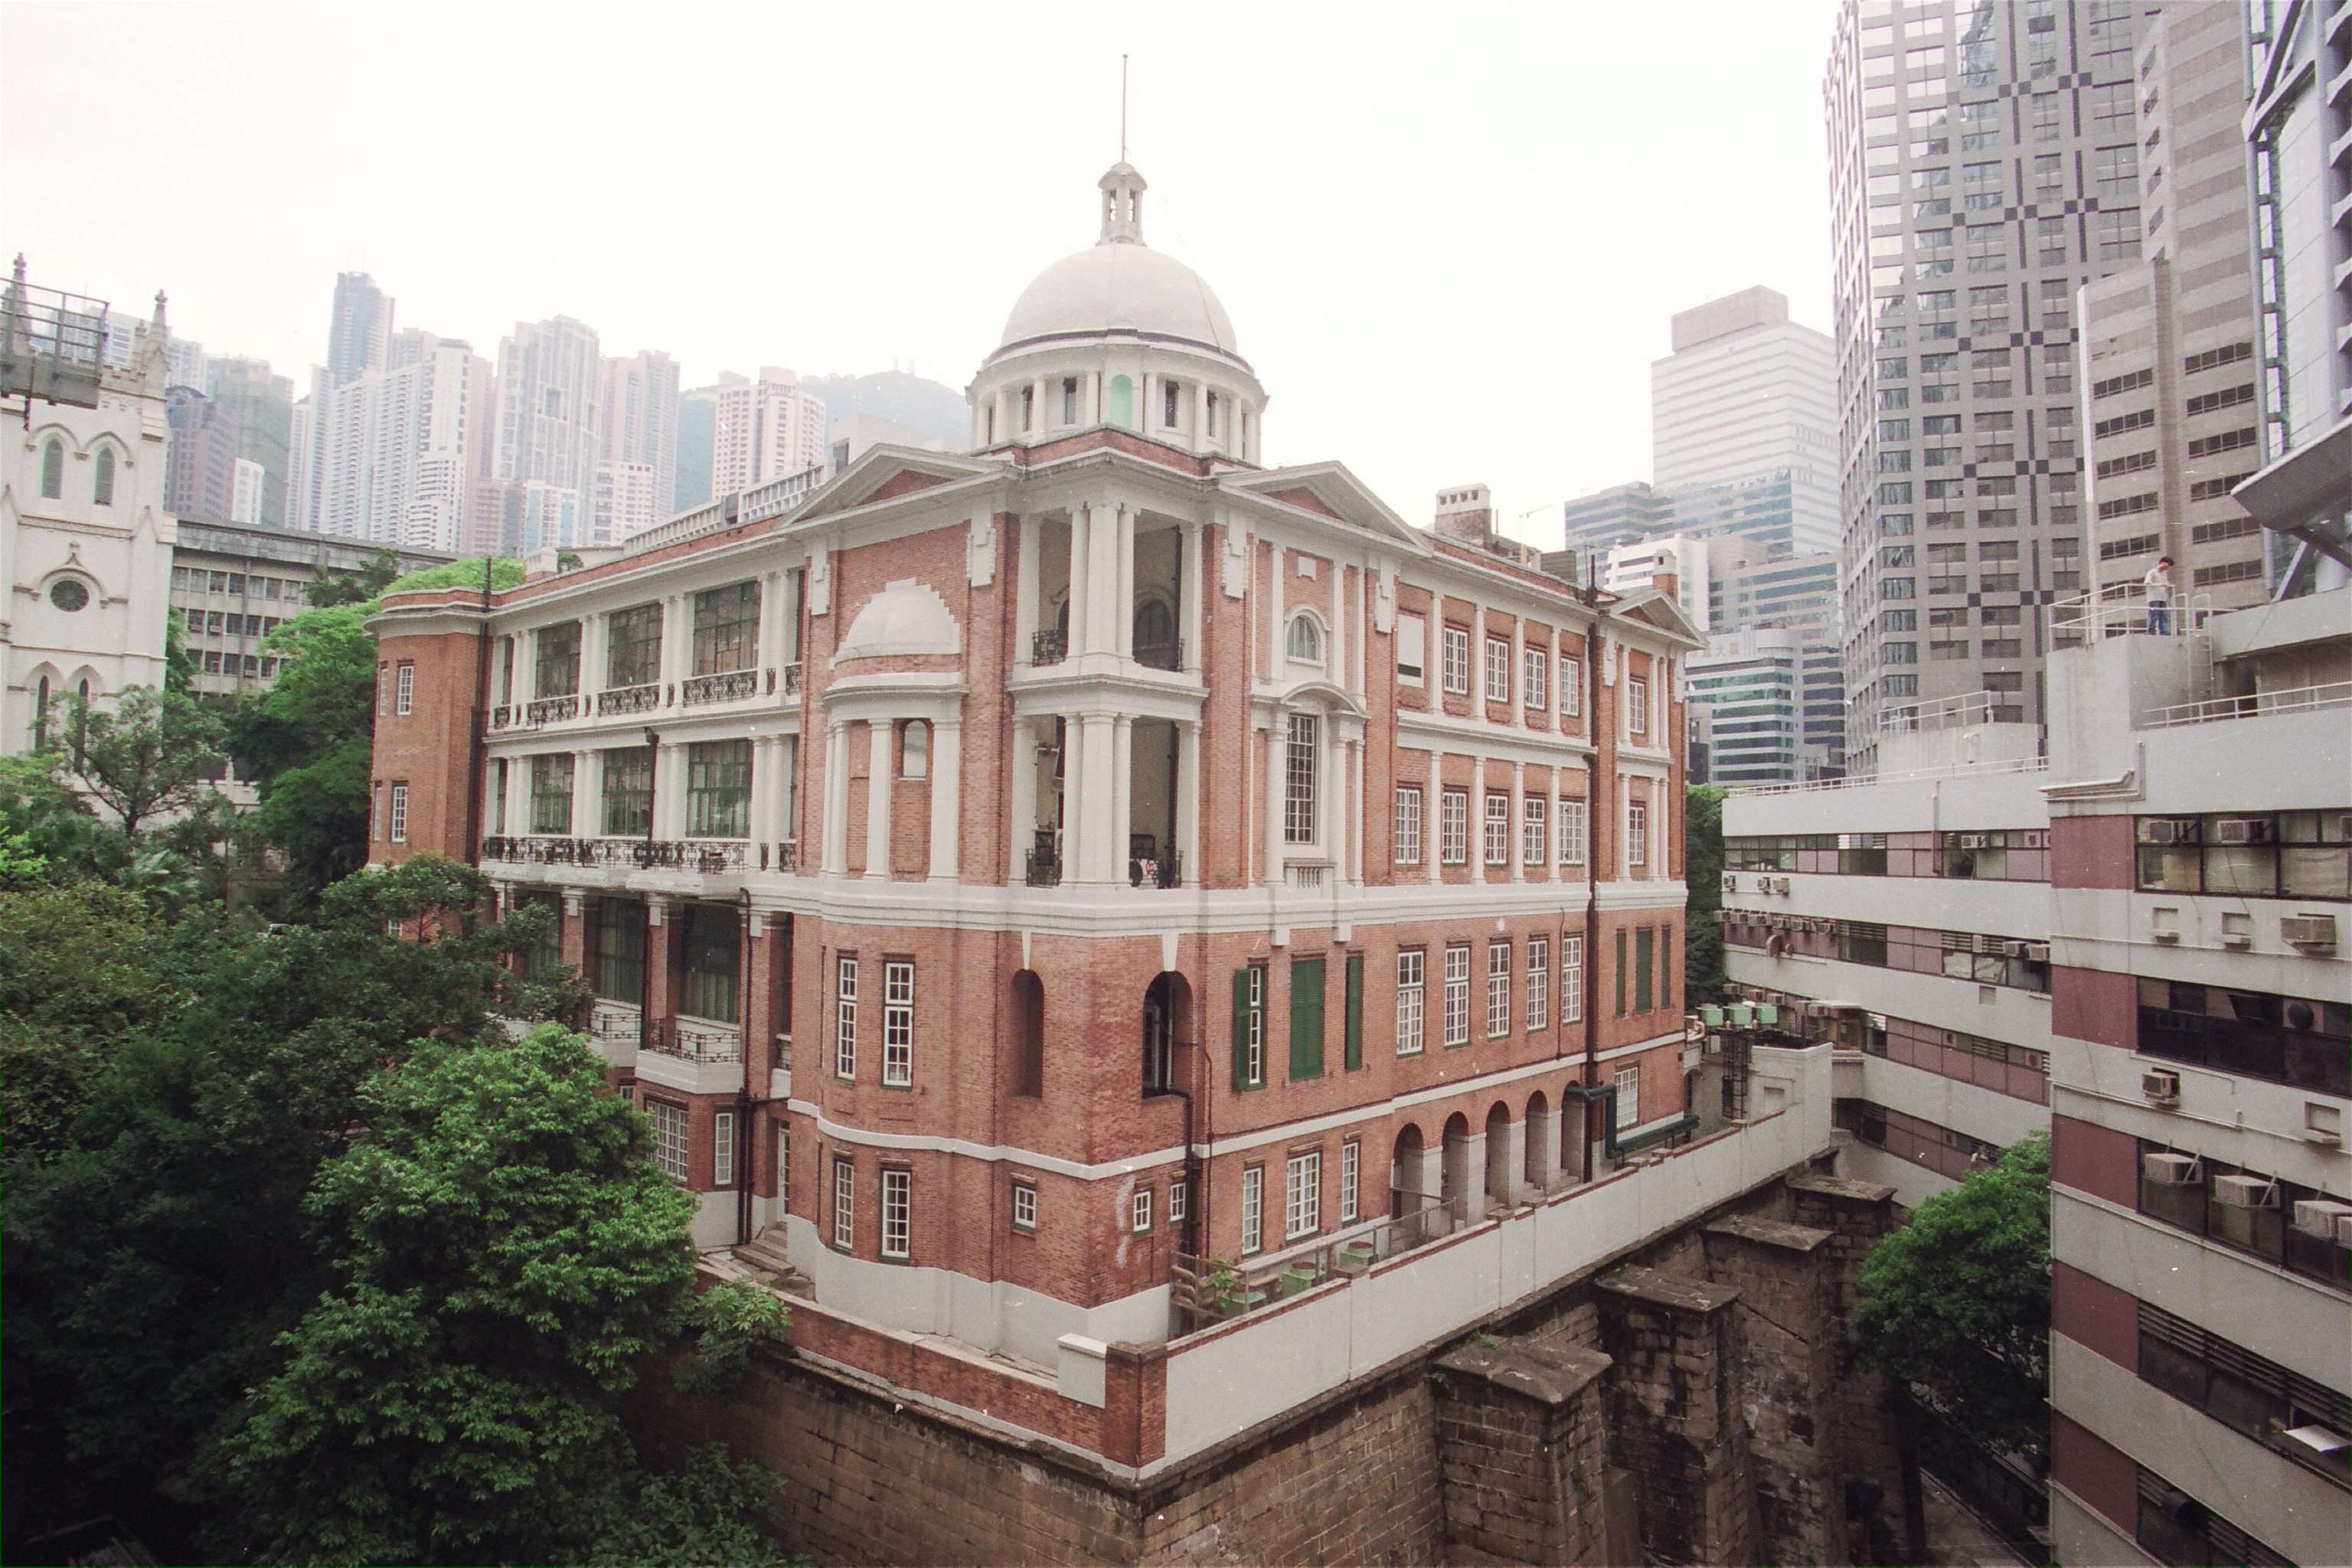 The former French Mission Building has been proposed as the centre for pushing Hong Kong’s role as an arbitration centre for Belt and Road disputes. Photo: SCMP Pictures